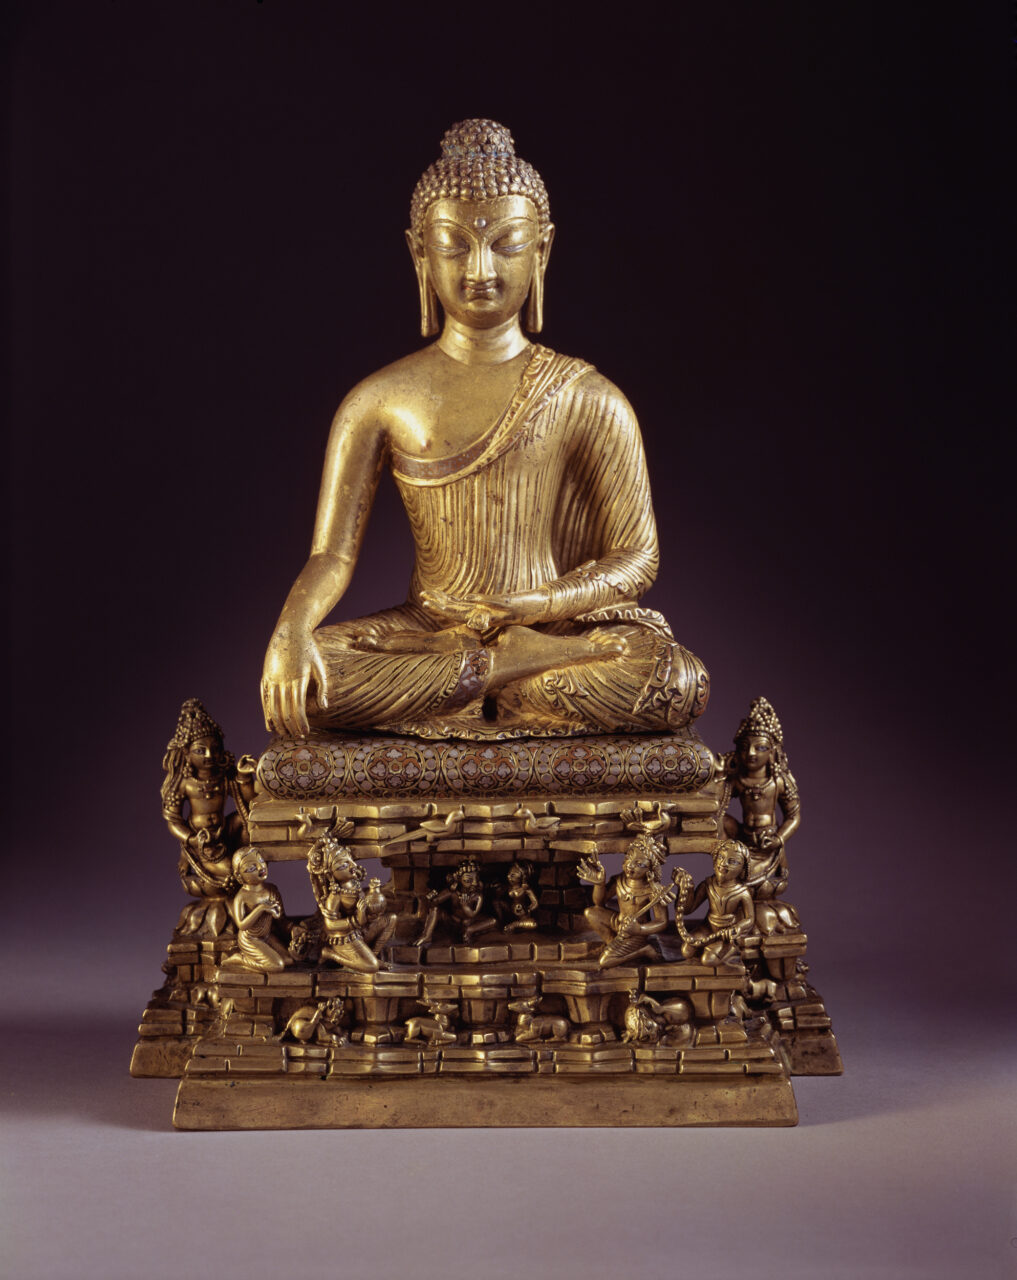 Bronze statuette of meditating Buddha seated on cushioned throne, around which many small figures kneel in reverence